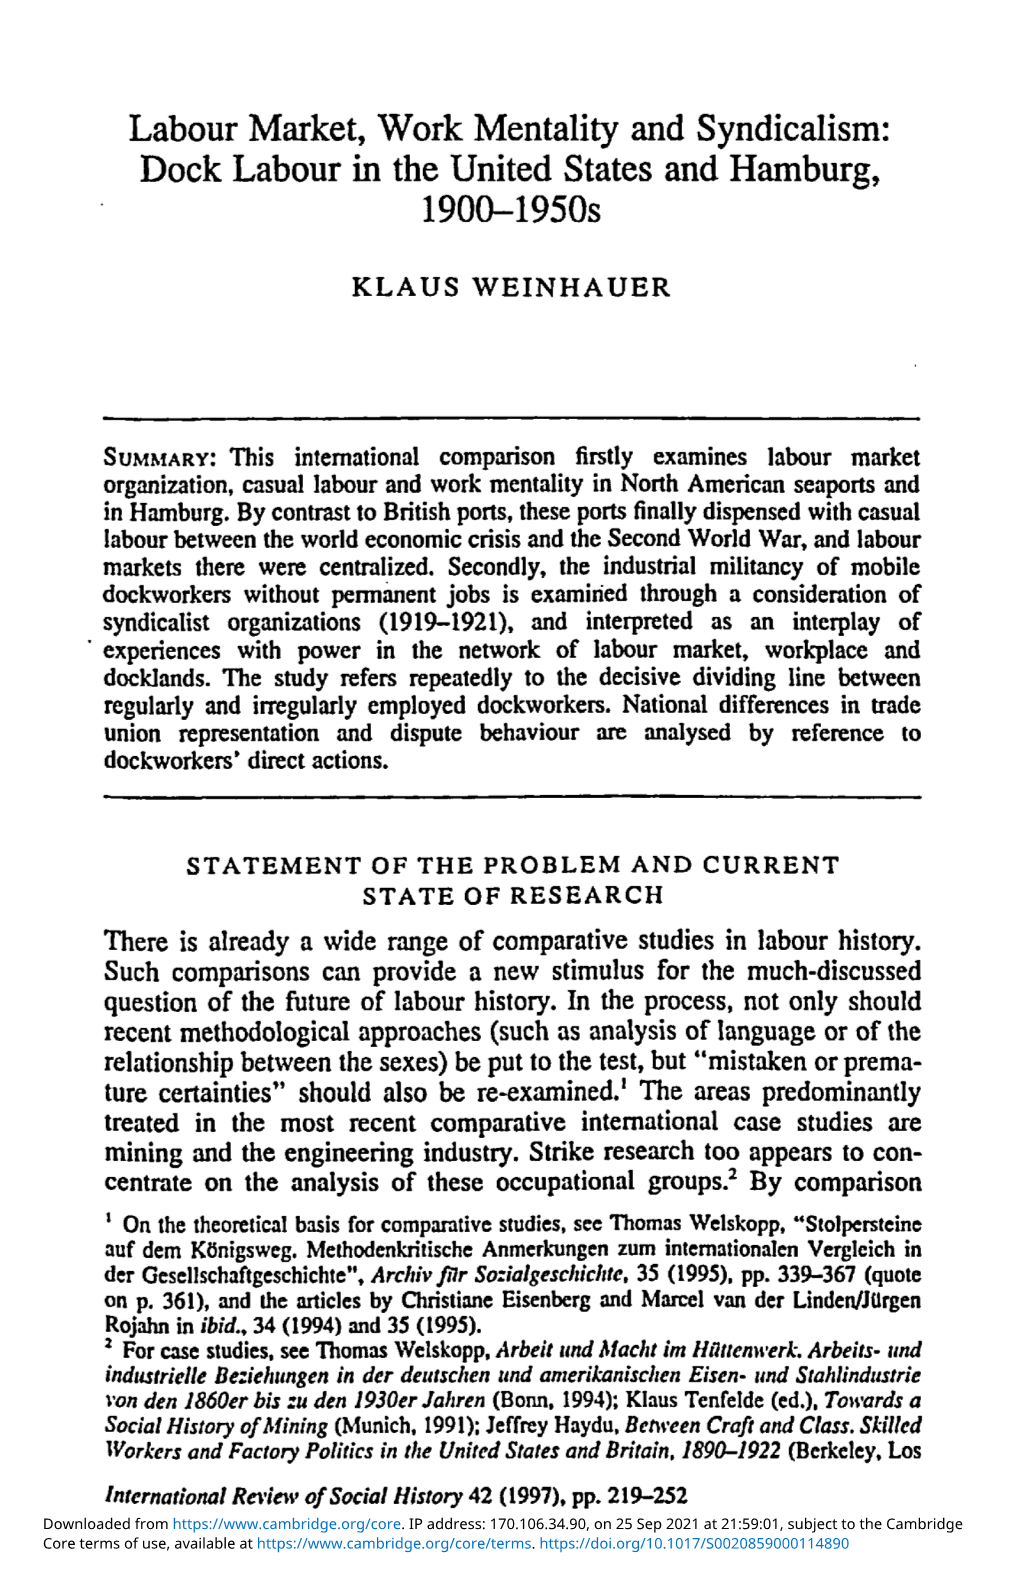 Labour Market, Work Mentality and Syndicalism: Dock Labour in the United States and Hamburg, 1900-1950S